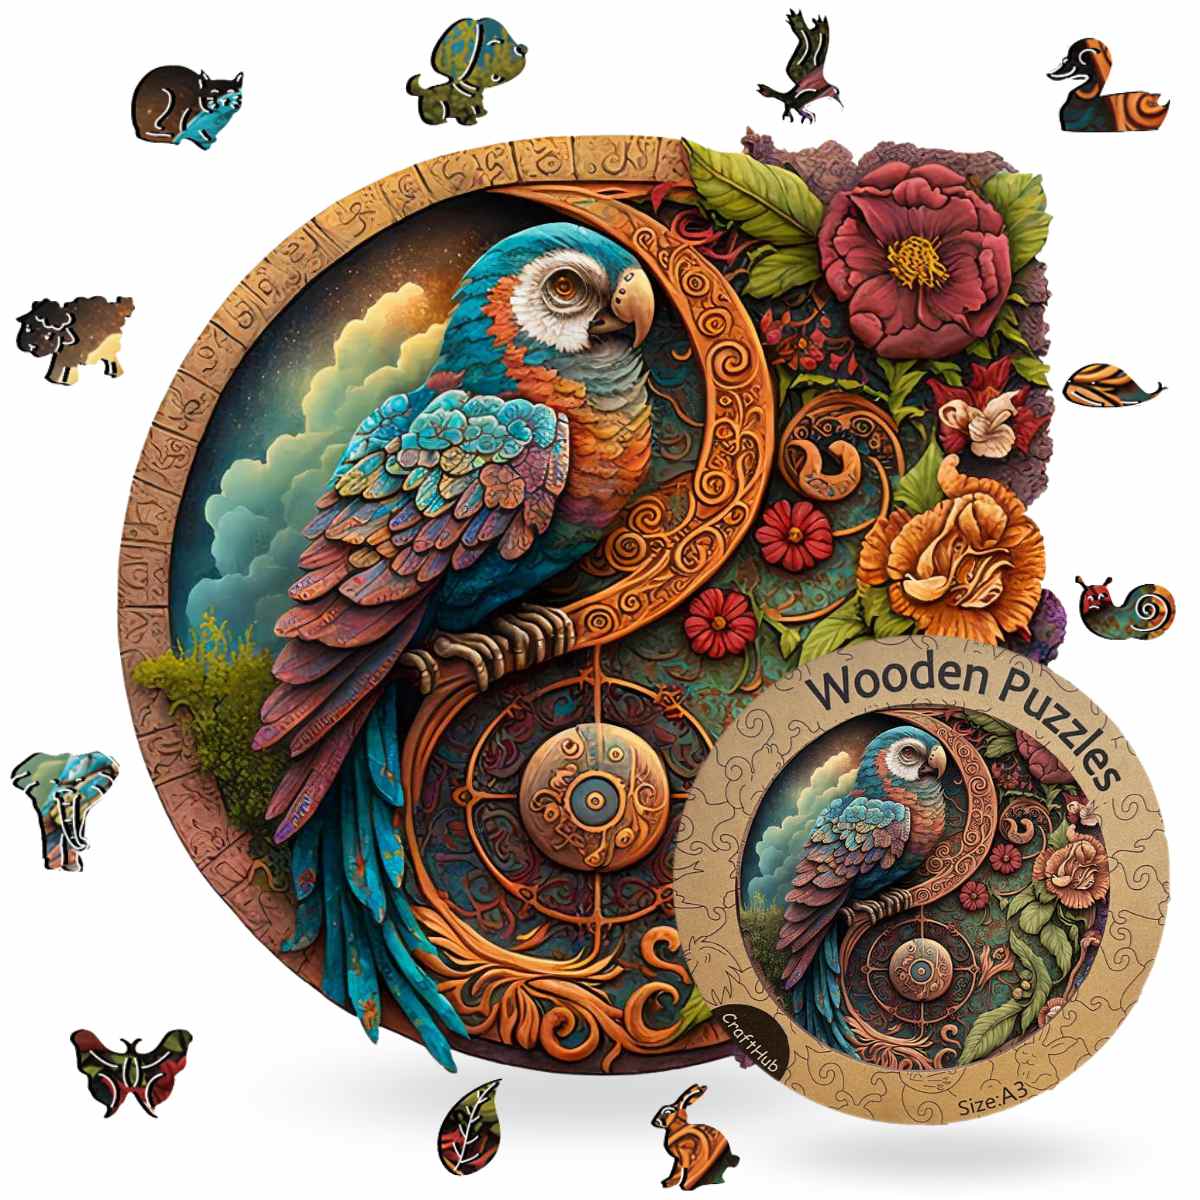 Animal Jigsaw Puzzle > Wooden Jigsaw Puzzle > Jigsaw Puzzle A3+Wooden Box Parrot Yin Yang - Jigsaw Puzzle